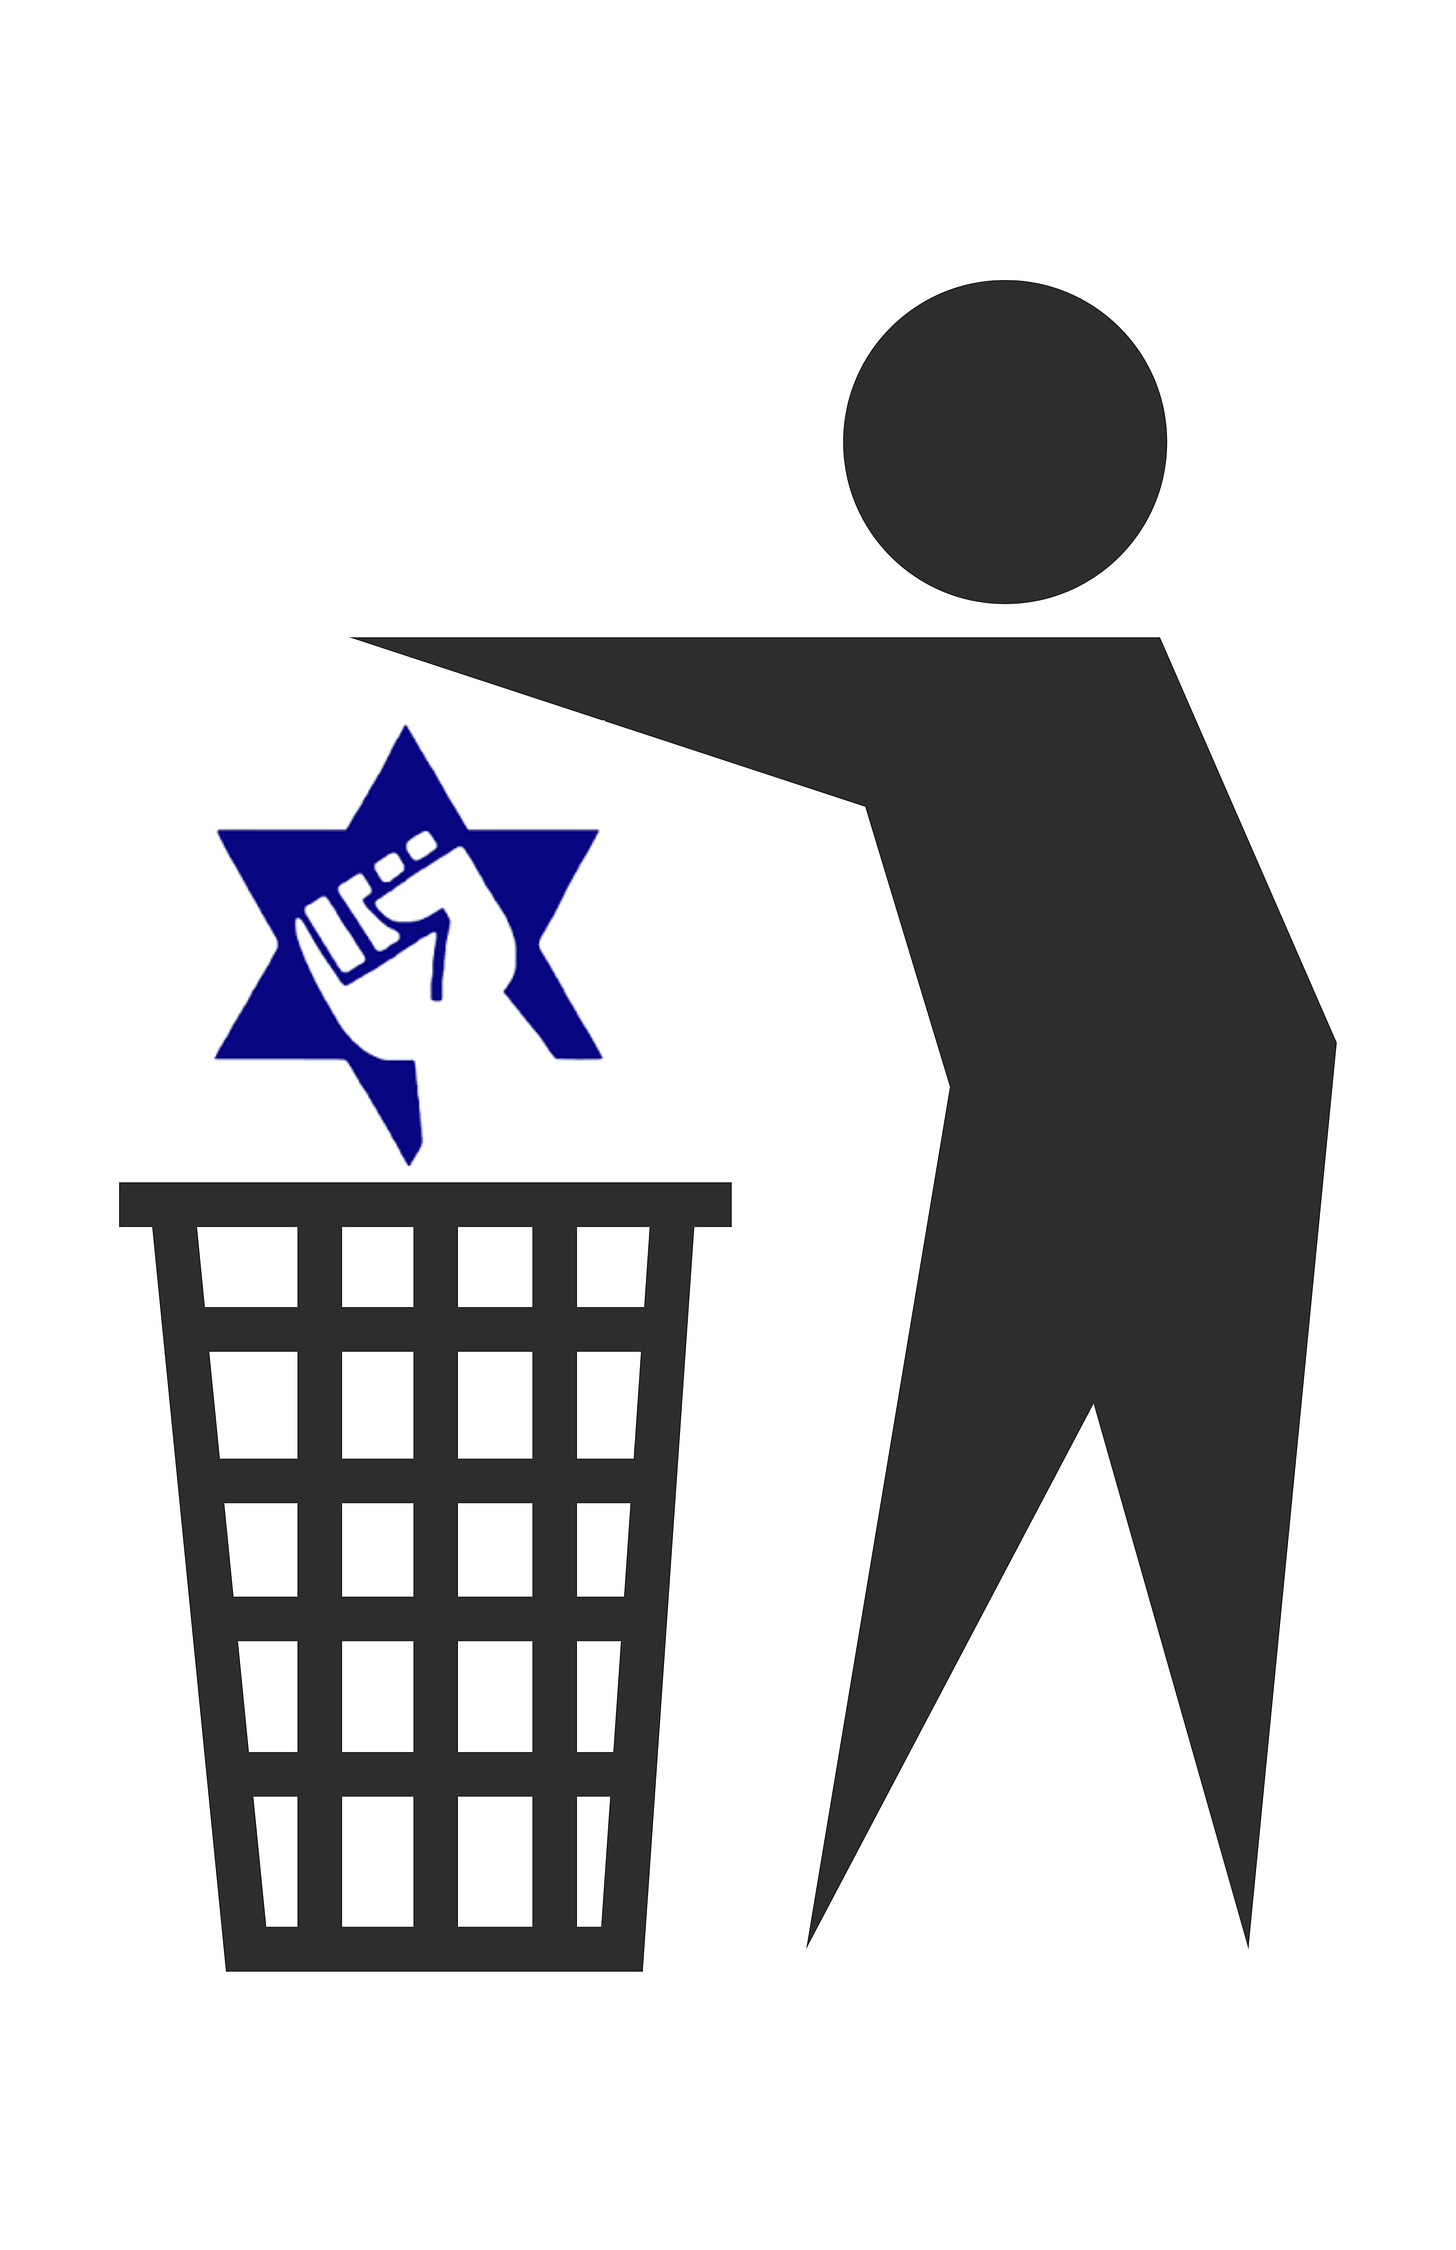 A figure throwing the symbol of the Jewish Defense League in the trash